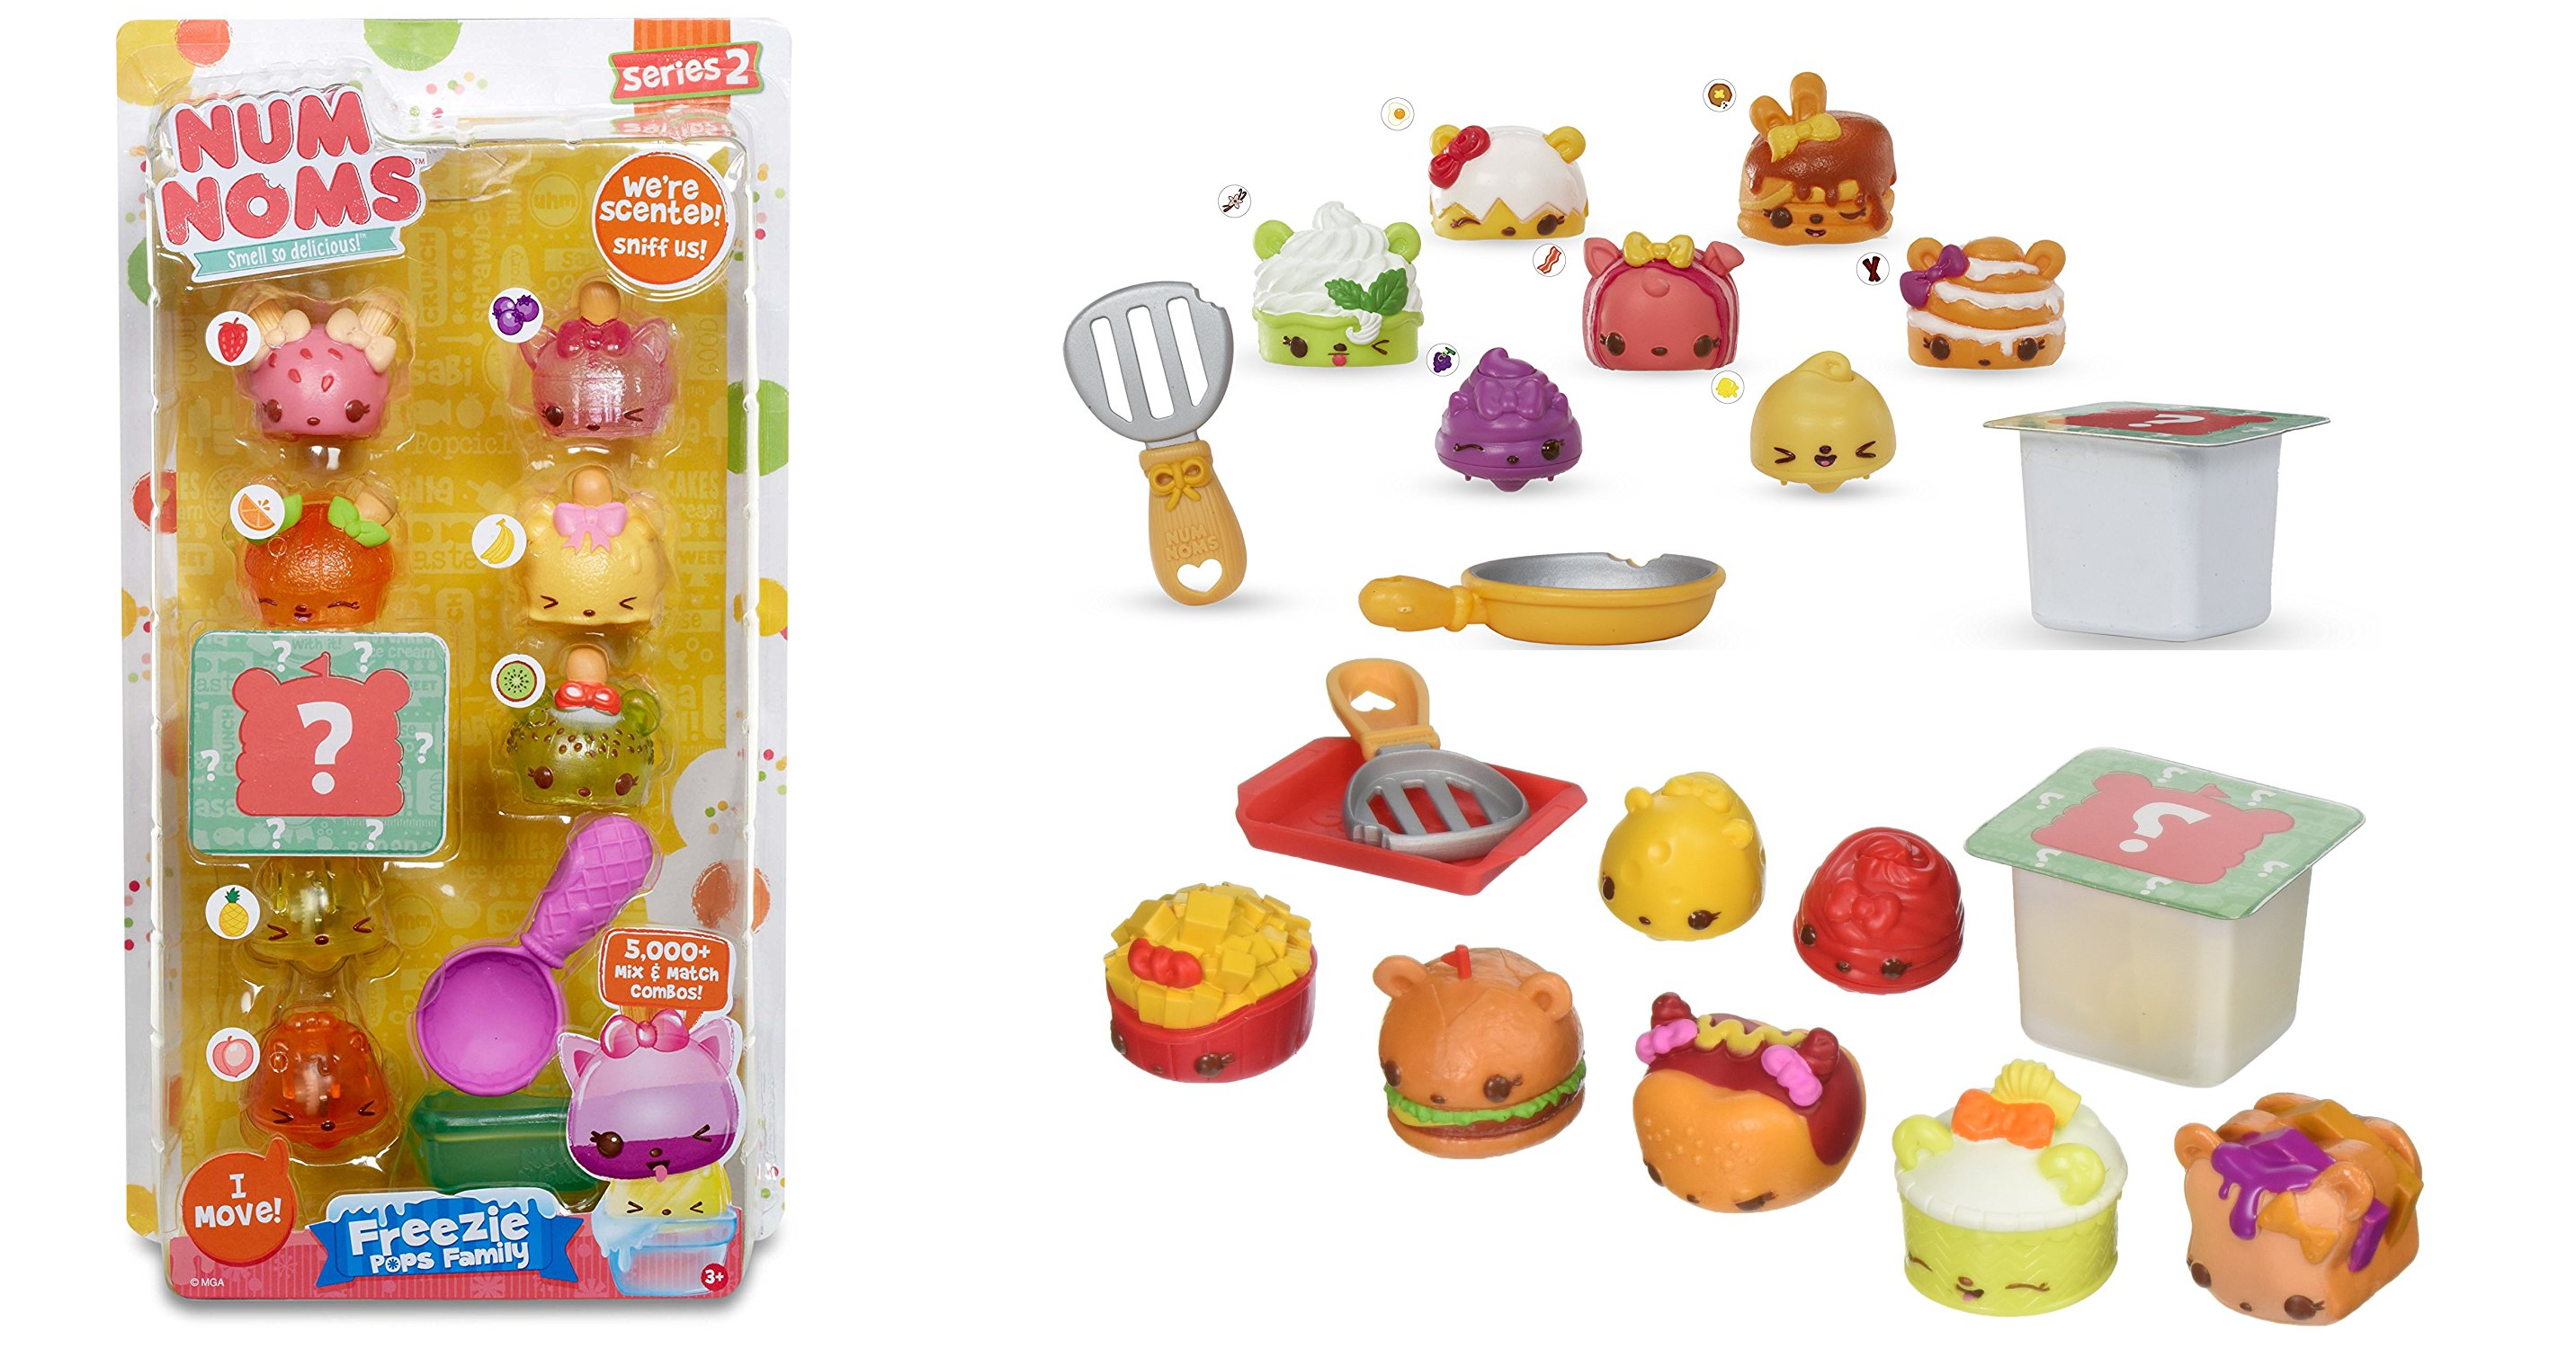 Num Noms Series 2 8 Packs Only $9.99 Each! (Reg $19.99) 4 Sets to Choose From!